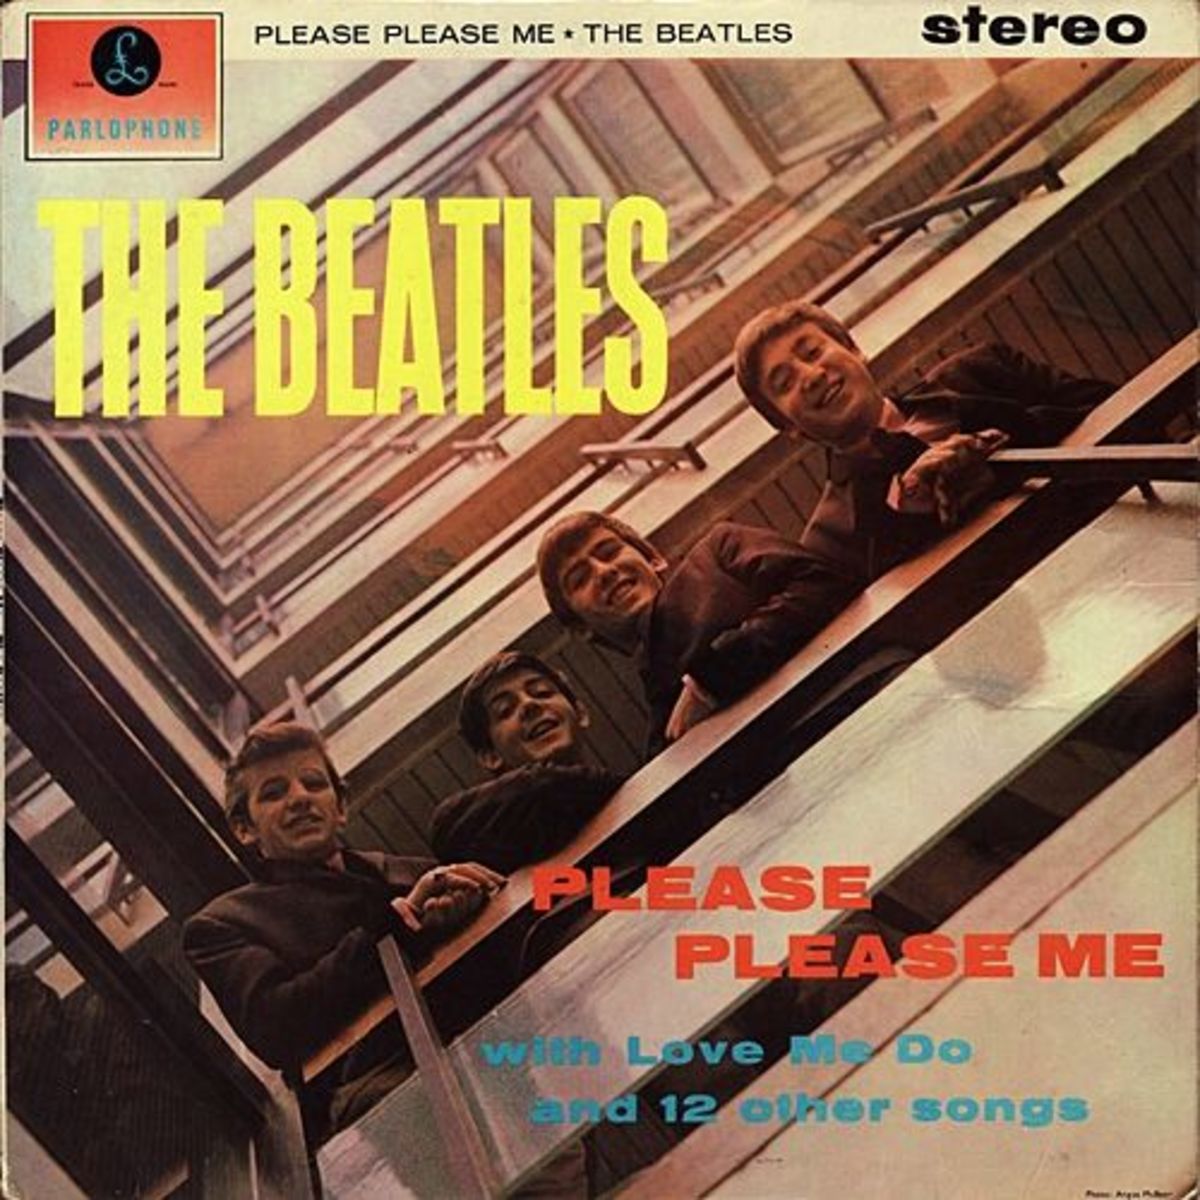 The Beatles "Please Please Me" Parlophone Records PCS 3042 Stereo 12" Vinyl Record  UK Pressing (1963) Large Stereo Cover 